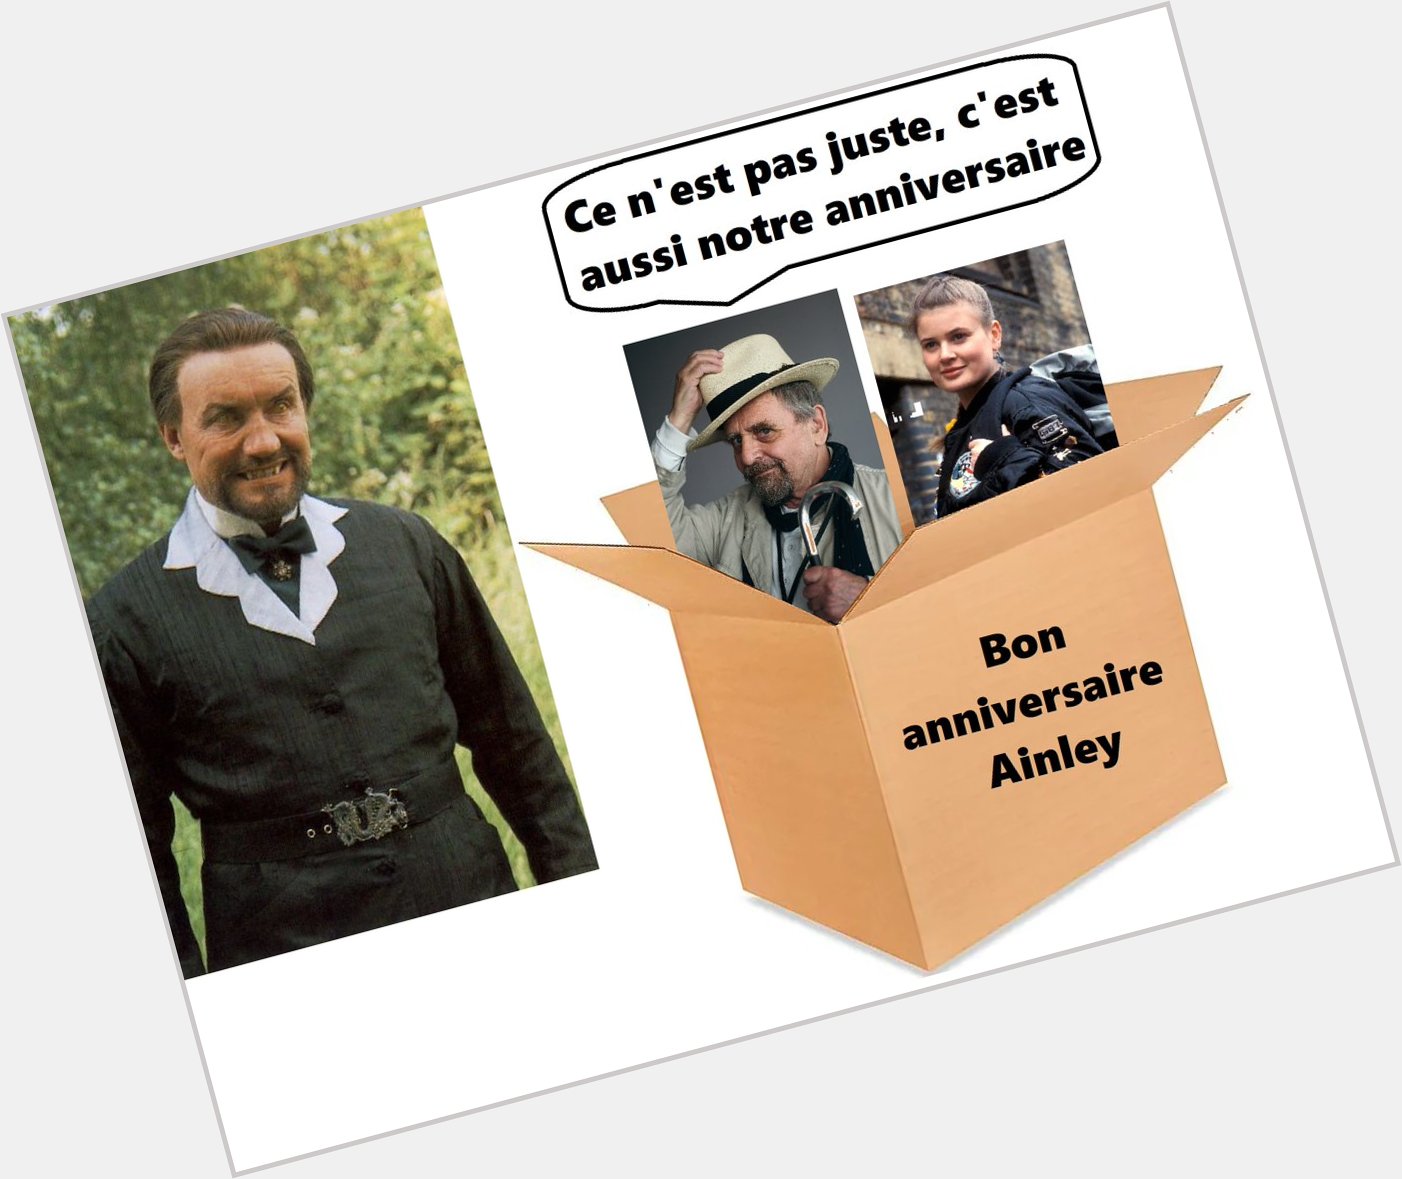   if Anthony Ainley were alive, he would like have a good gift too . Happy birthday. 